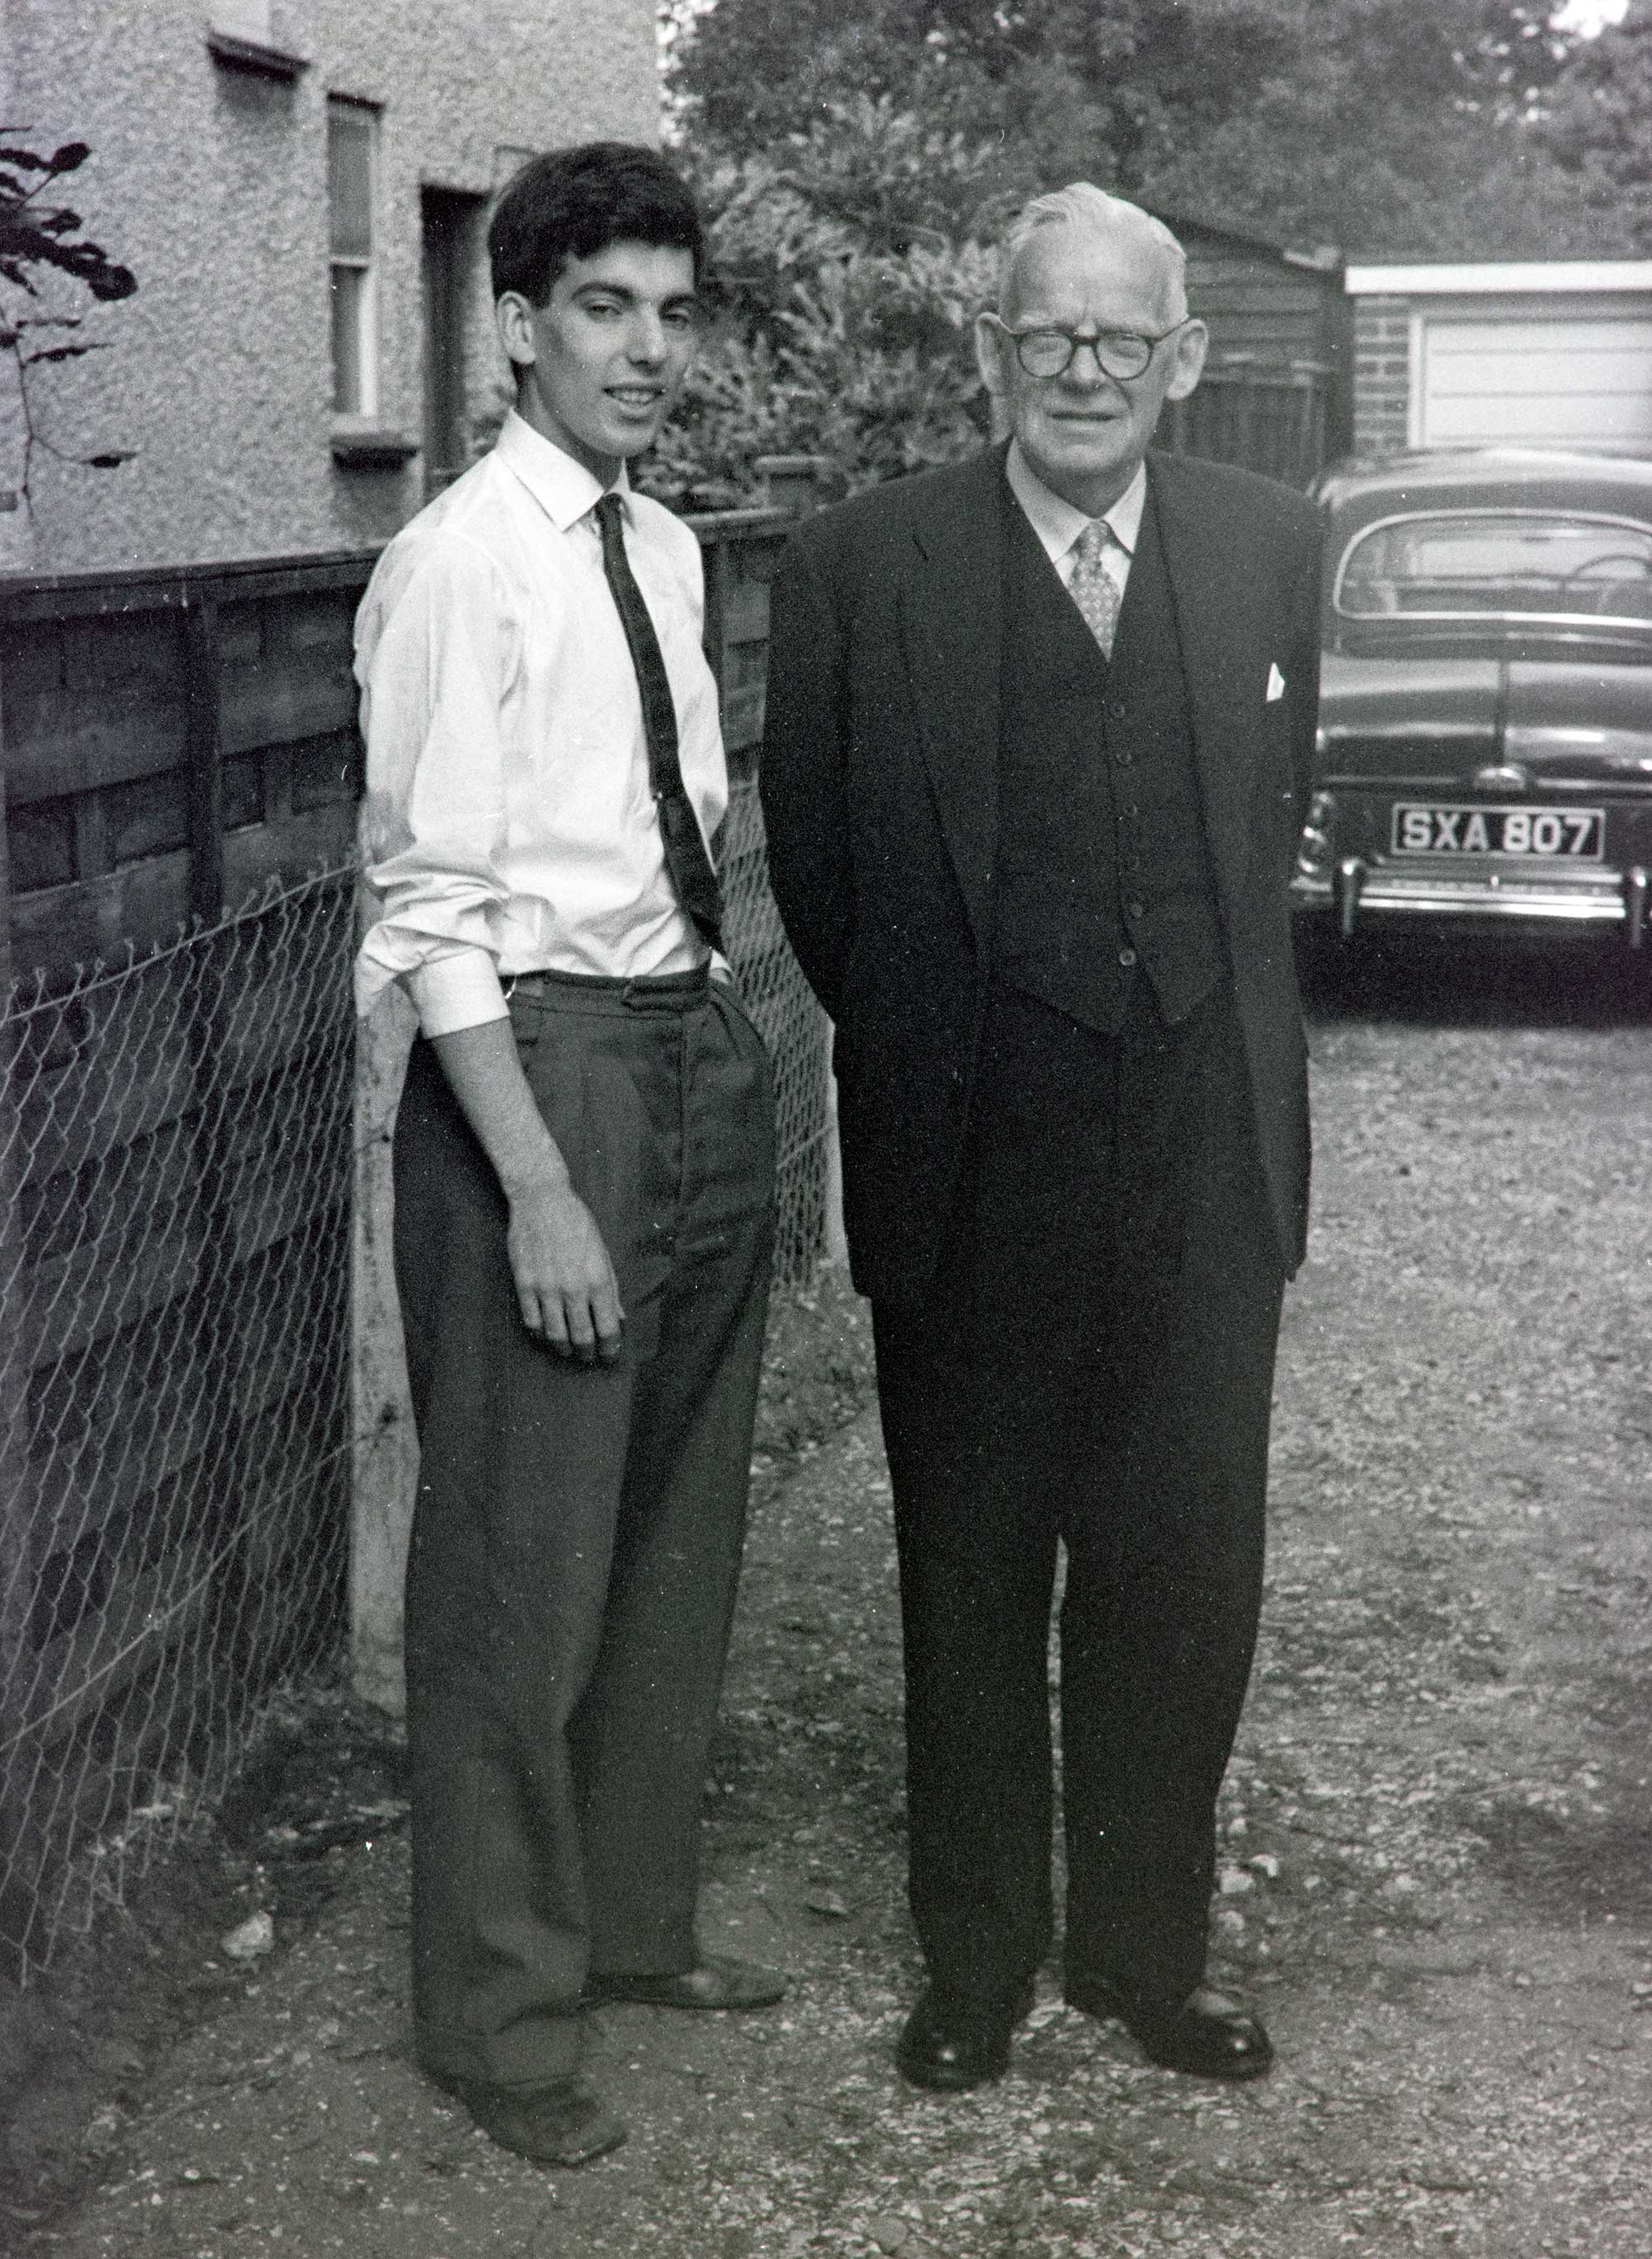 Frederick with Malcolm in the driveway of 37 Aldershot Road